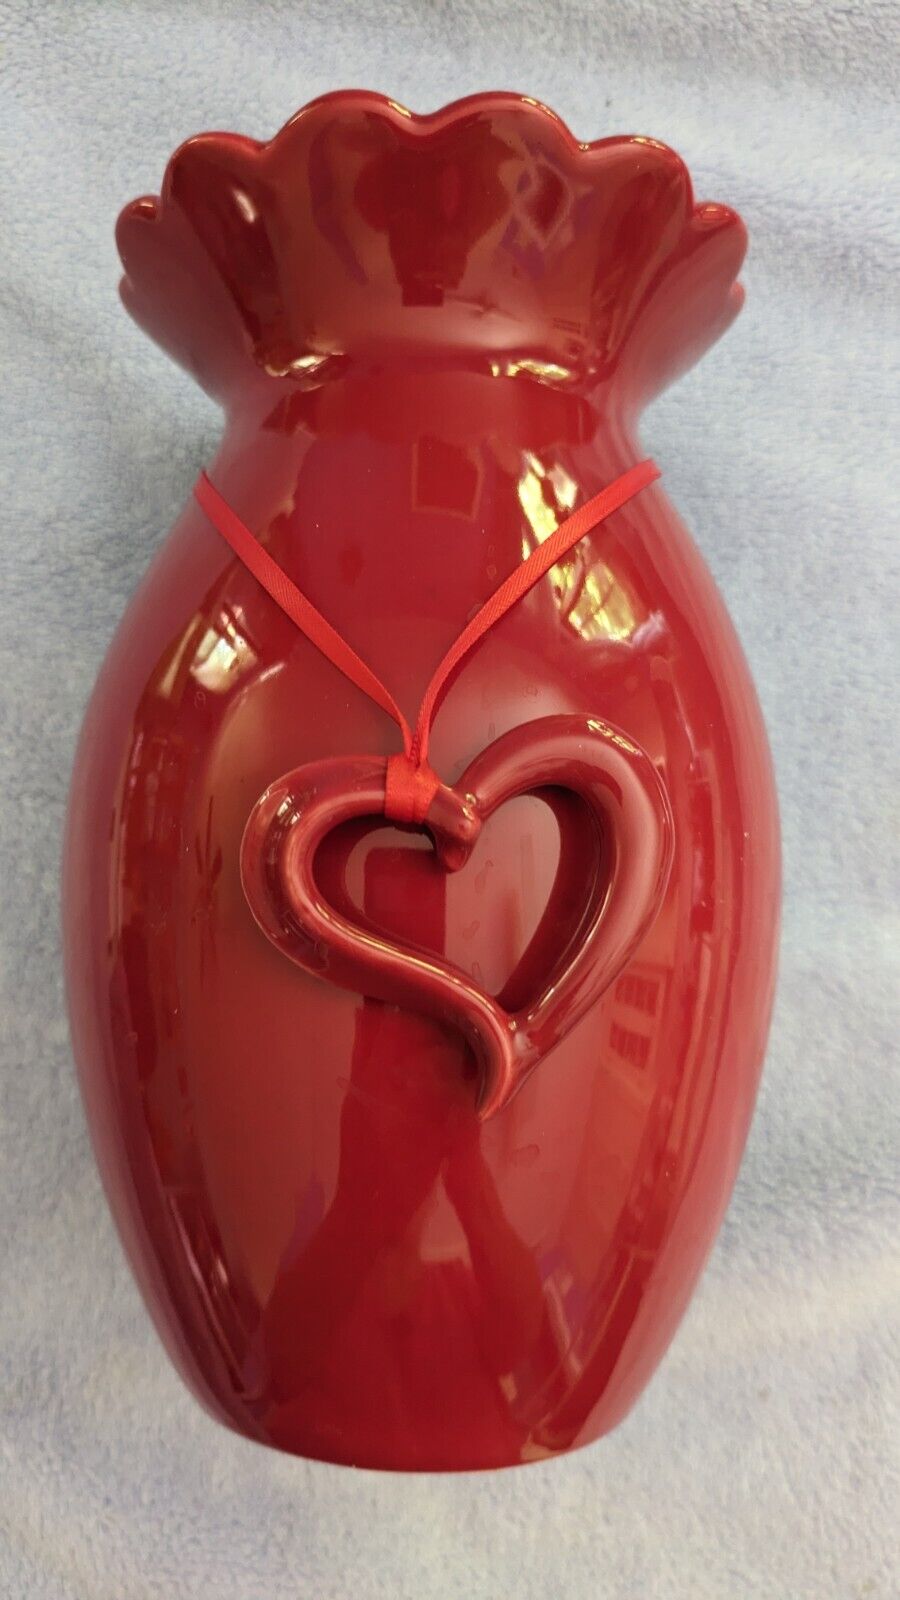 Red Ceramic Vase with Heart